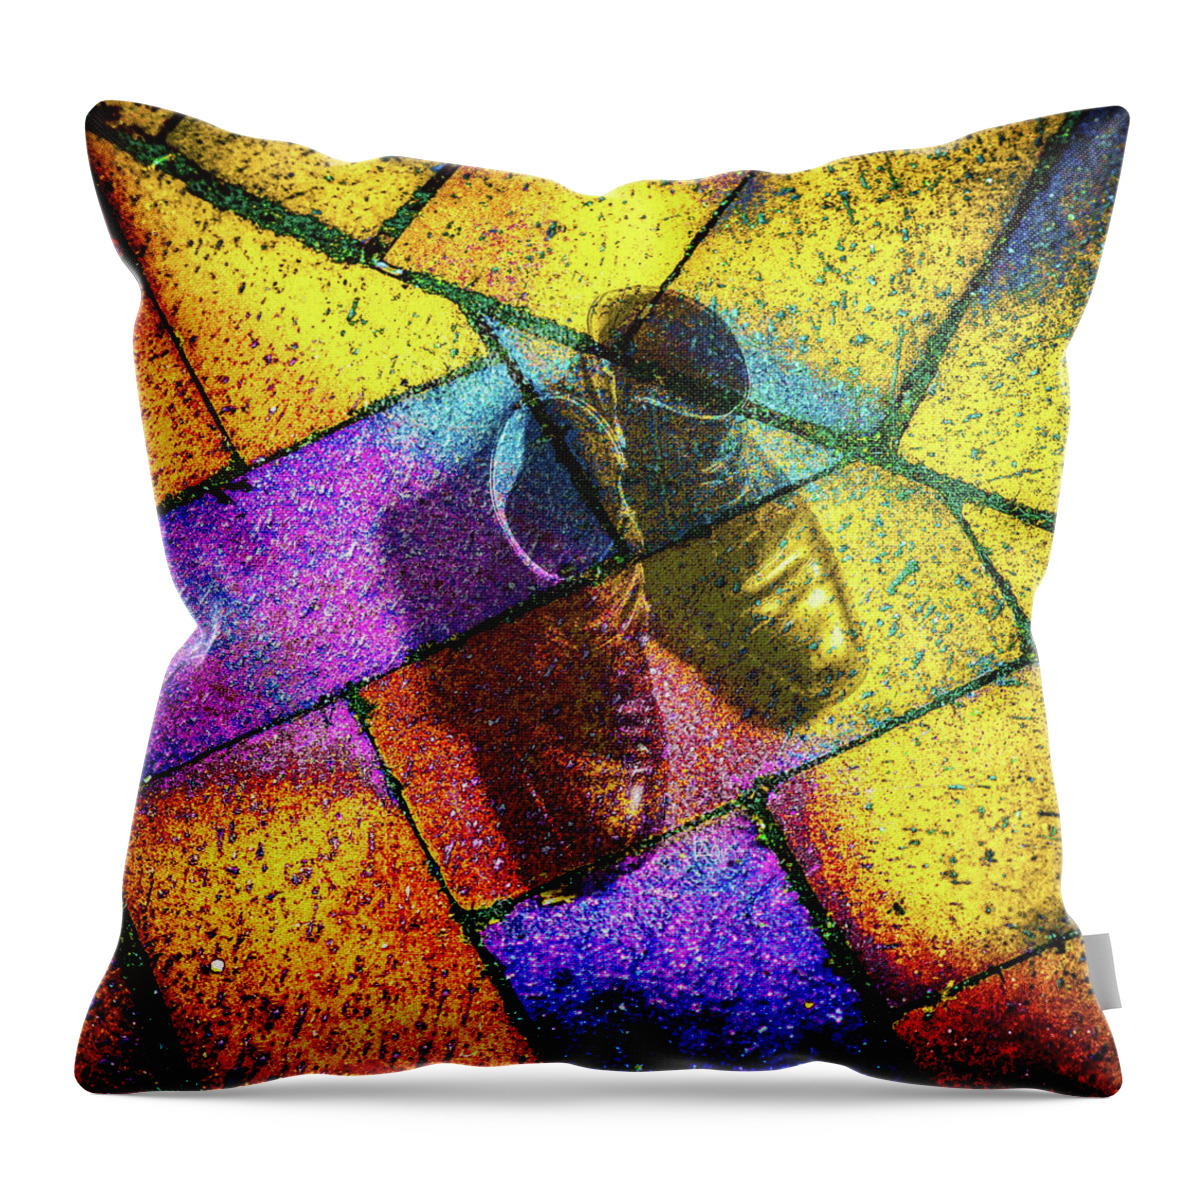 Abstract Throw Pillow featuring the photograph Remembering Yellow Brick Road by Ronda Broatch